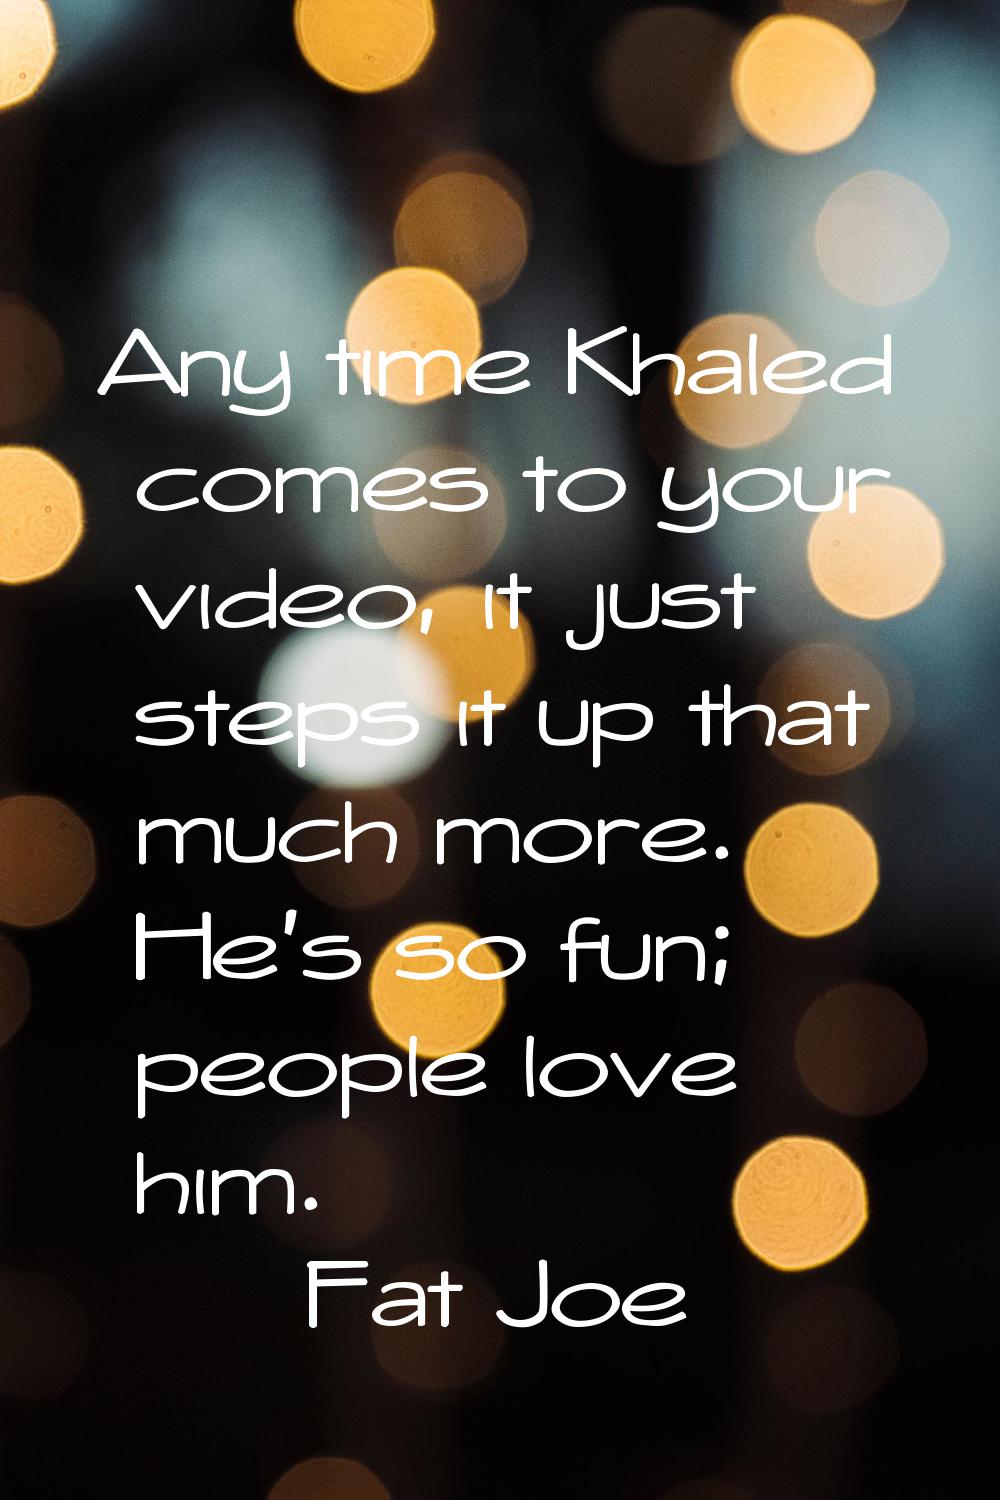 Any time Khaled comes to your video, it just steps it up that much more. He's so fun; people love h